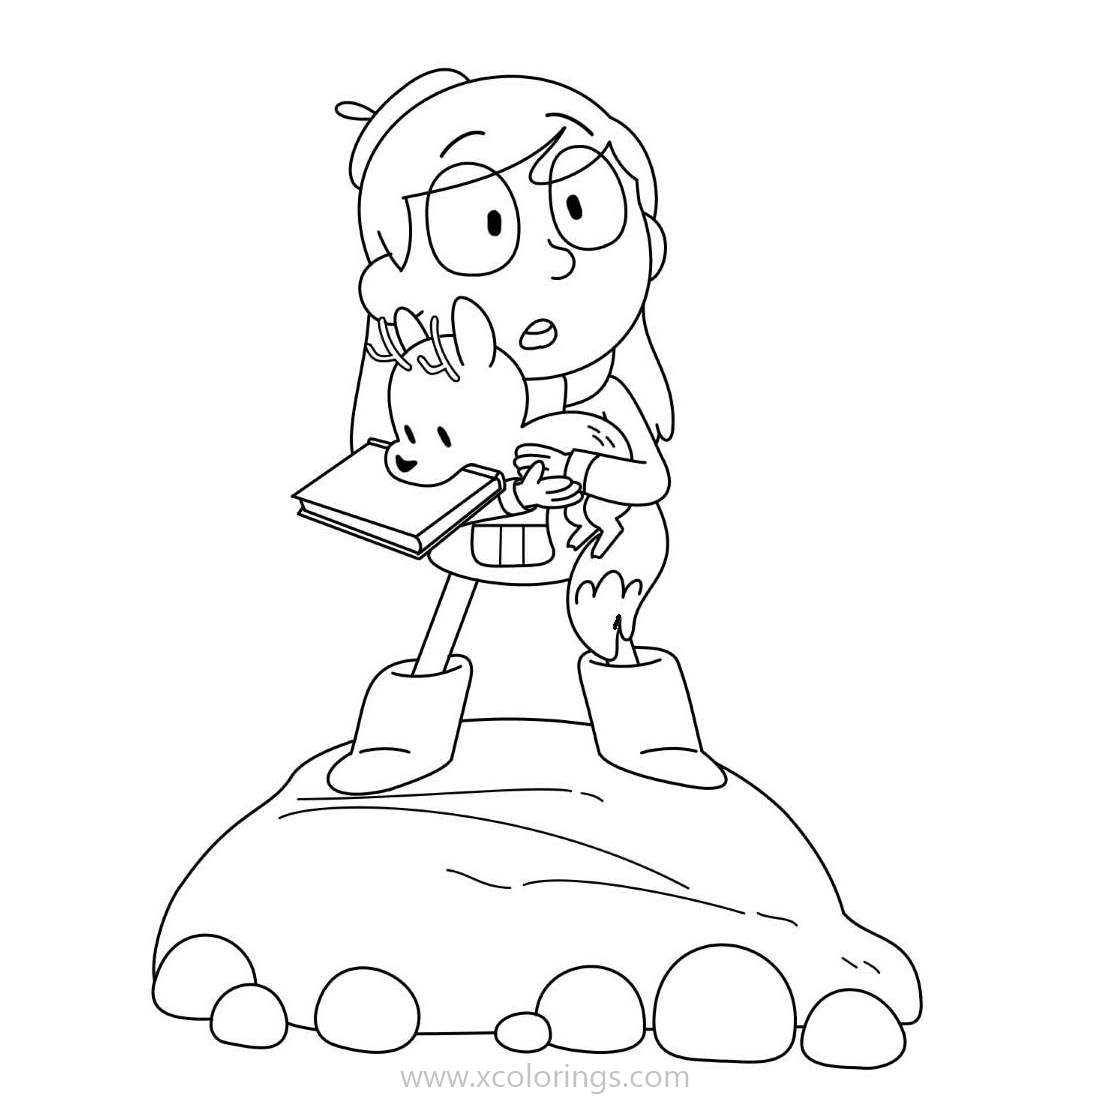 Free Hilda Coloring Pages Standing On The Rocks printable